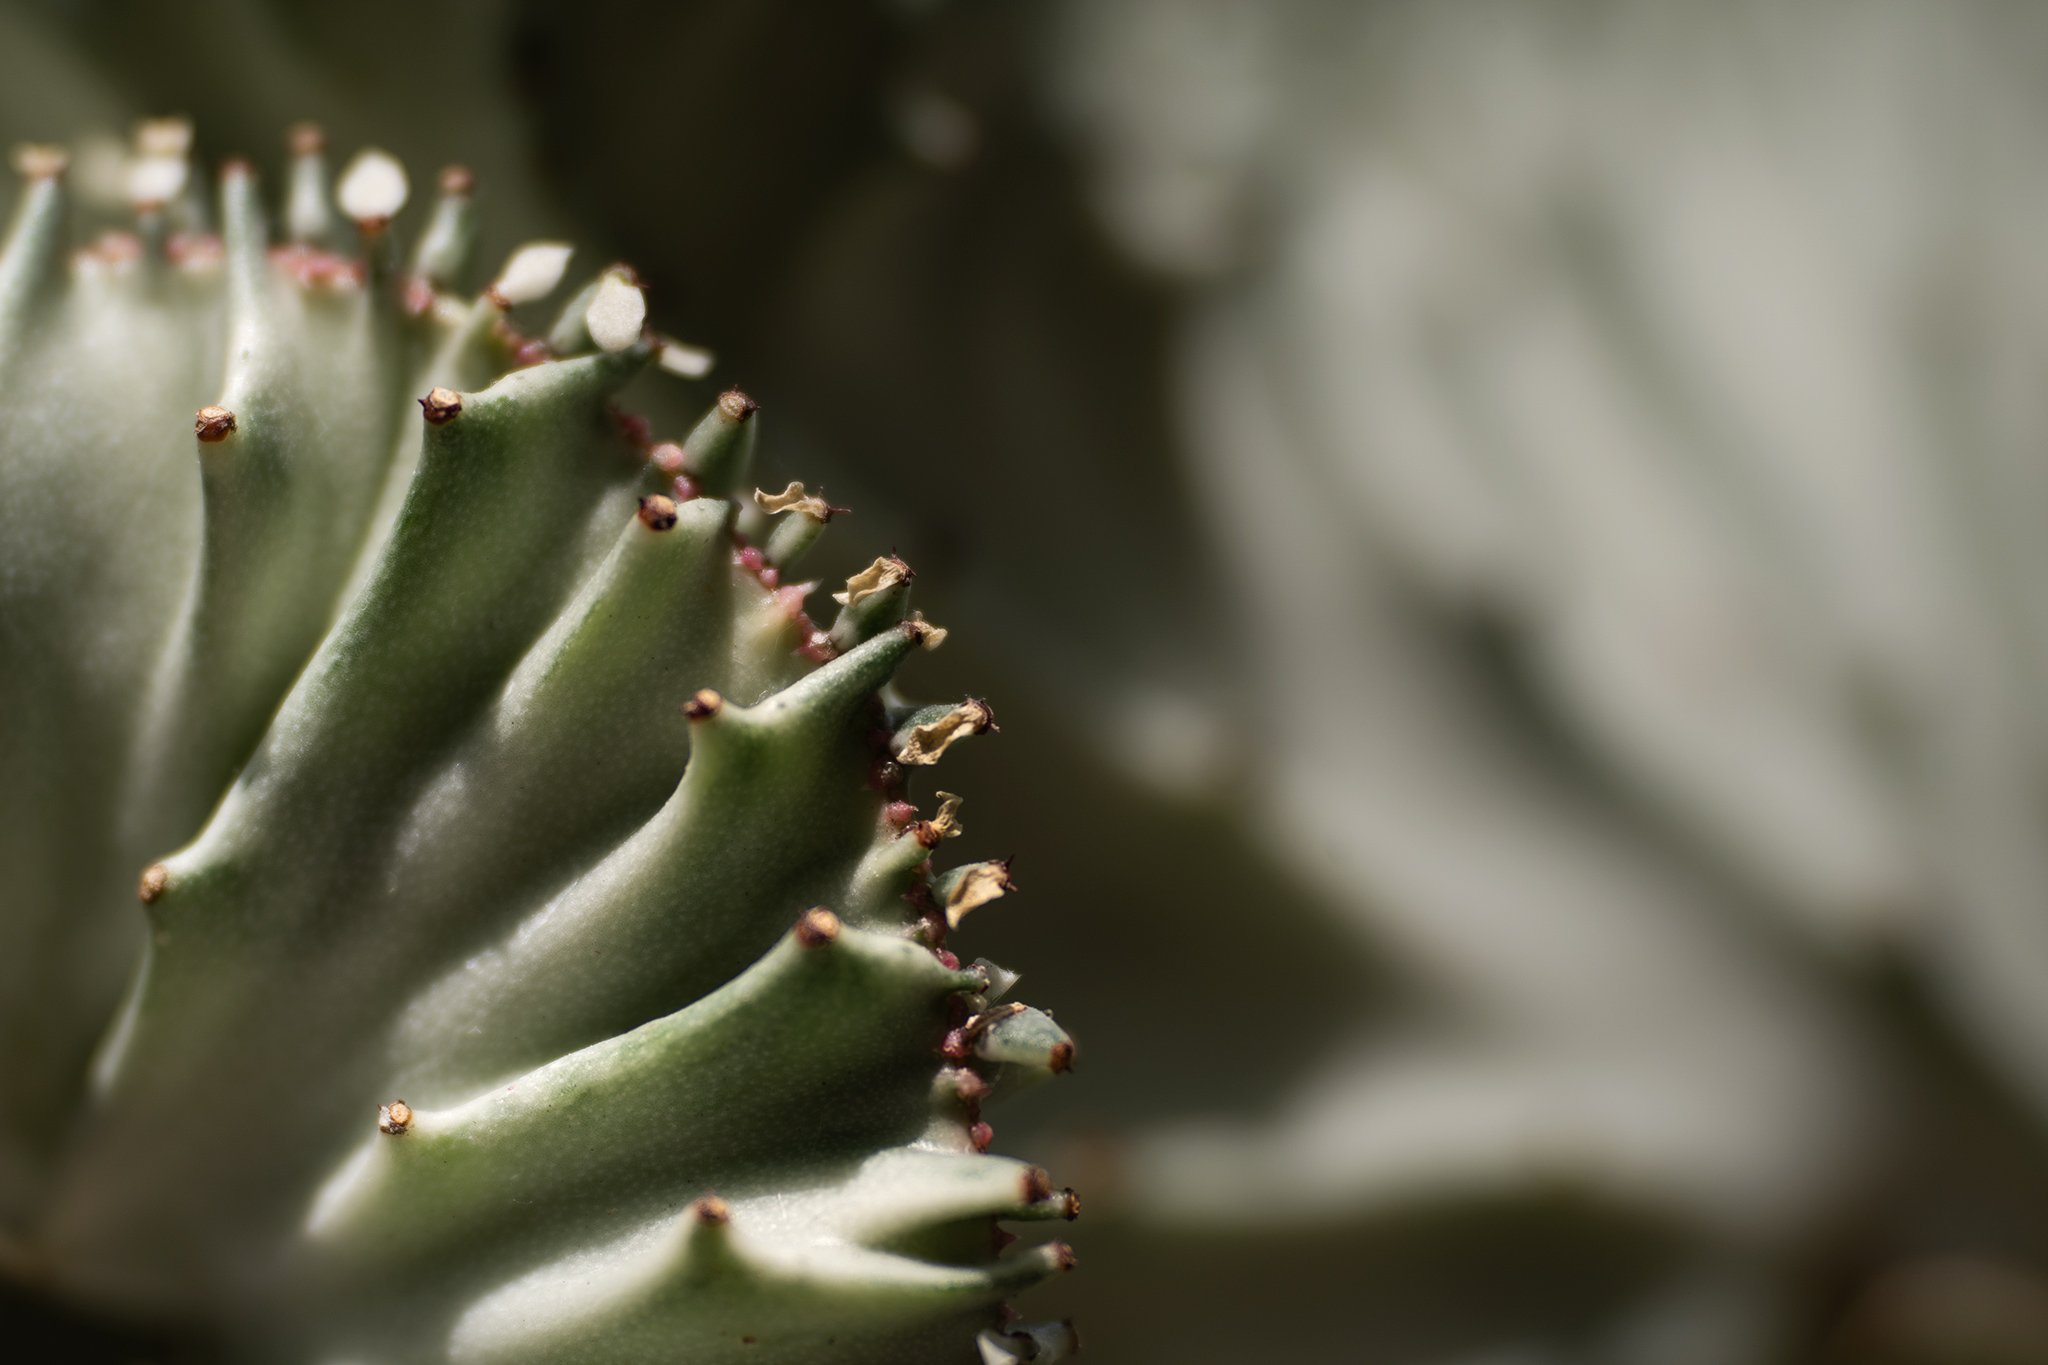 Storytelling in nature - coral-cactus-image